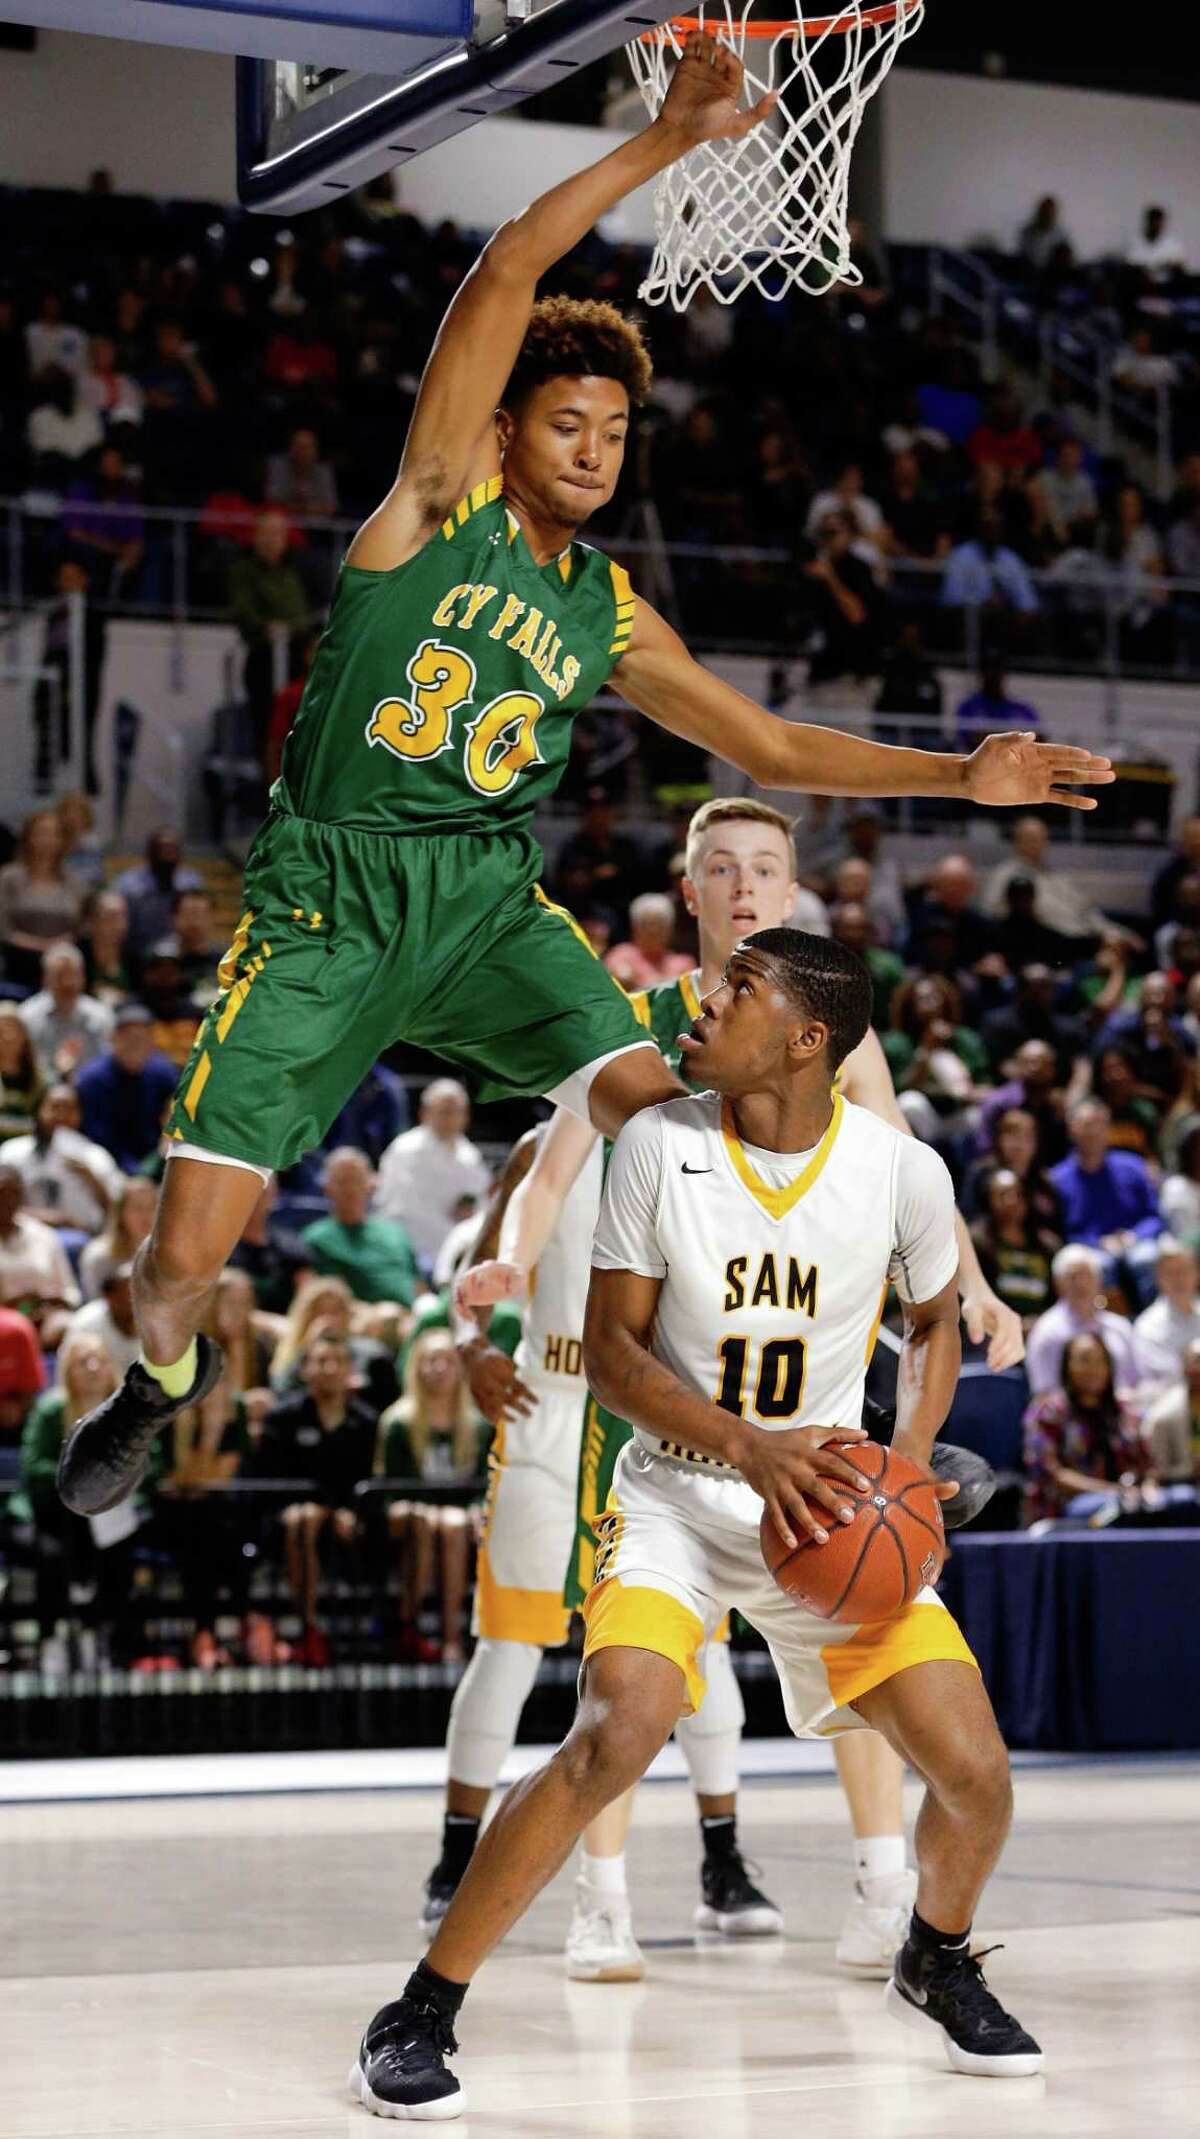 Sam Houston's Chris Green (10) waits to put up his shot as Cy Falls' TJ Goodwin (30) flies by during the first half of their regional quarterfinal game at Delmar Fieldhouse Feb. 27, 2018 in Houston, TX. (Michael Wyke / For the Chronicle)